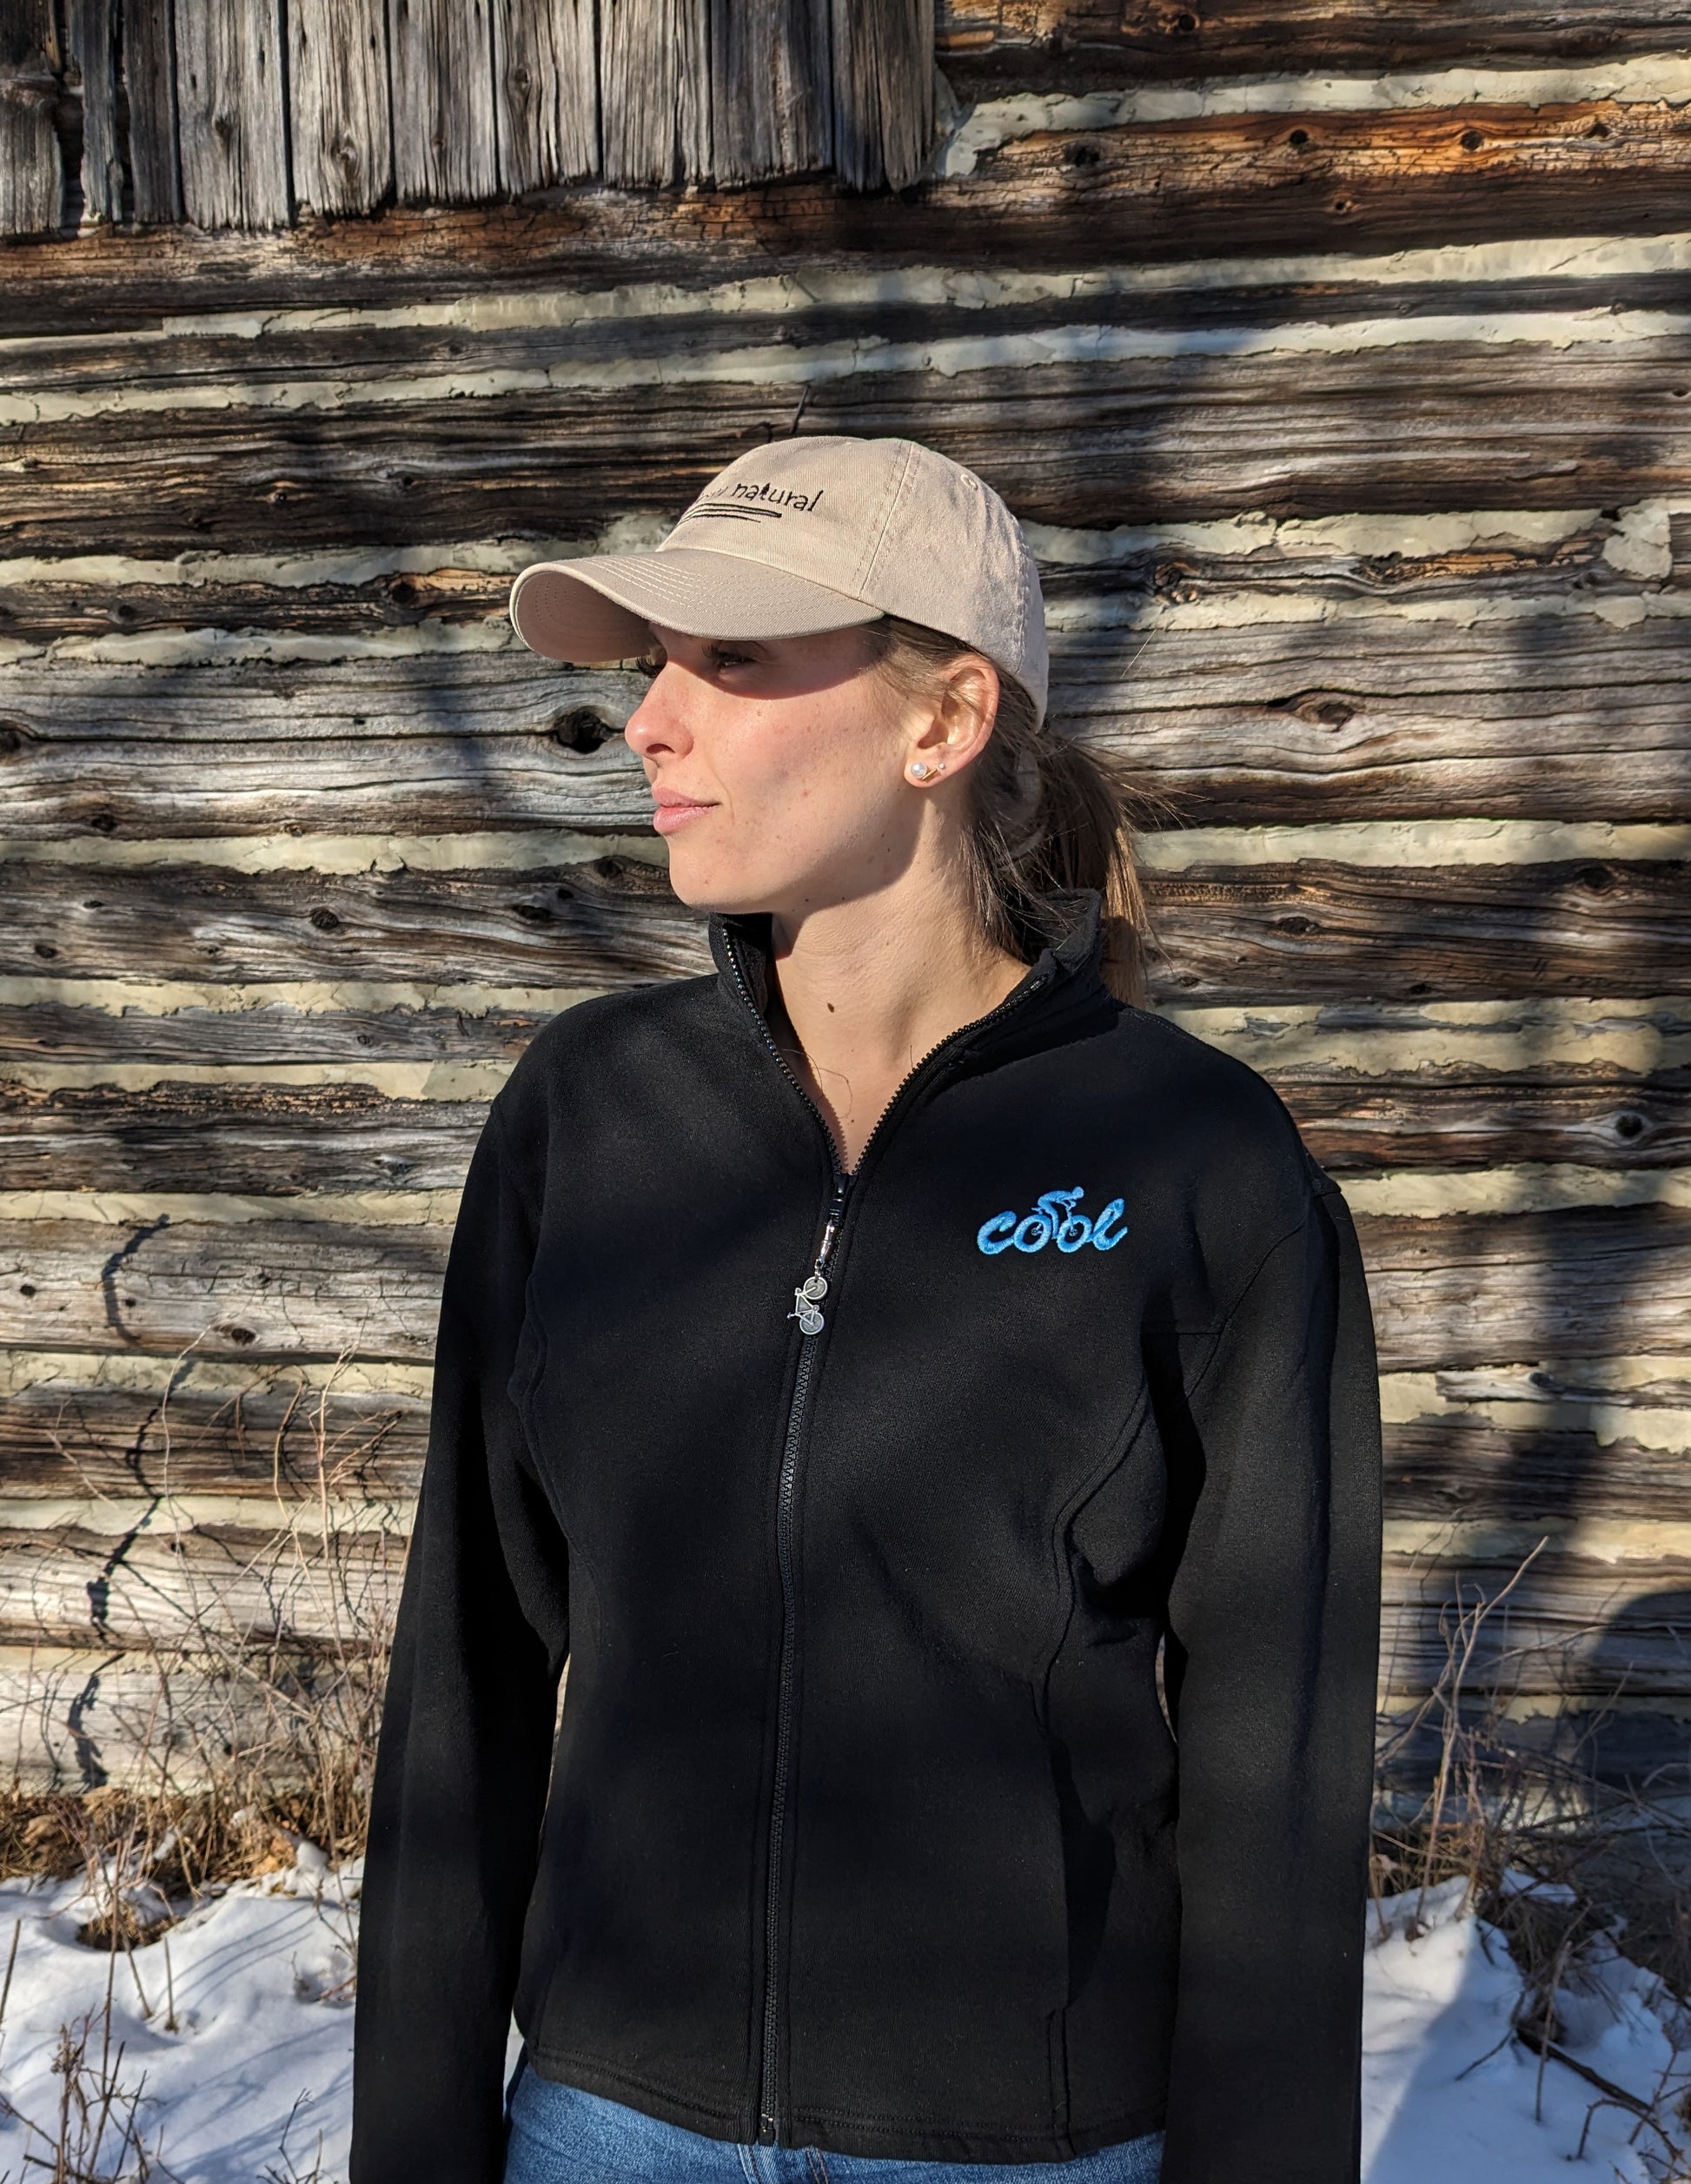 'Cool' embroidered upper left chest Hemp Track Jacket with removable pewter bike zipper pull - Women's sizing our model Morgan is wearing a black hemp track jacket with ice blue 'cool' +cyclist embroidered on upper left chest 55% Hemp 45% Organic Cotton – Fleece